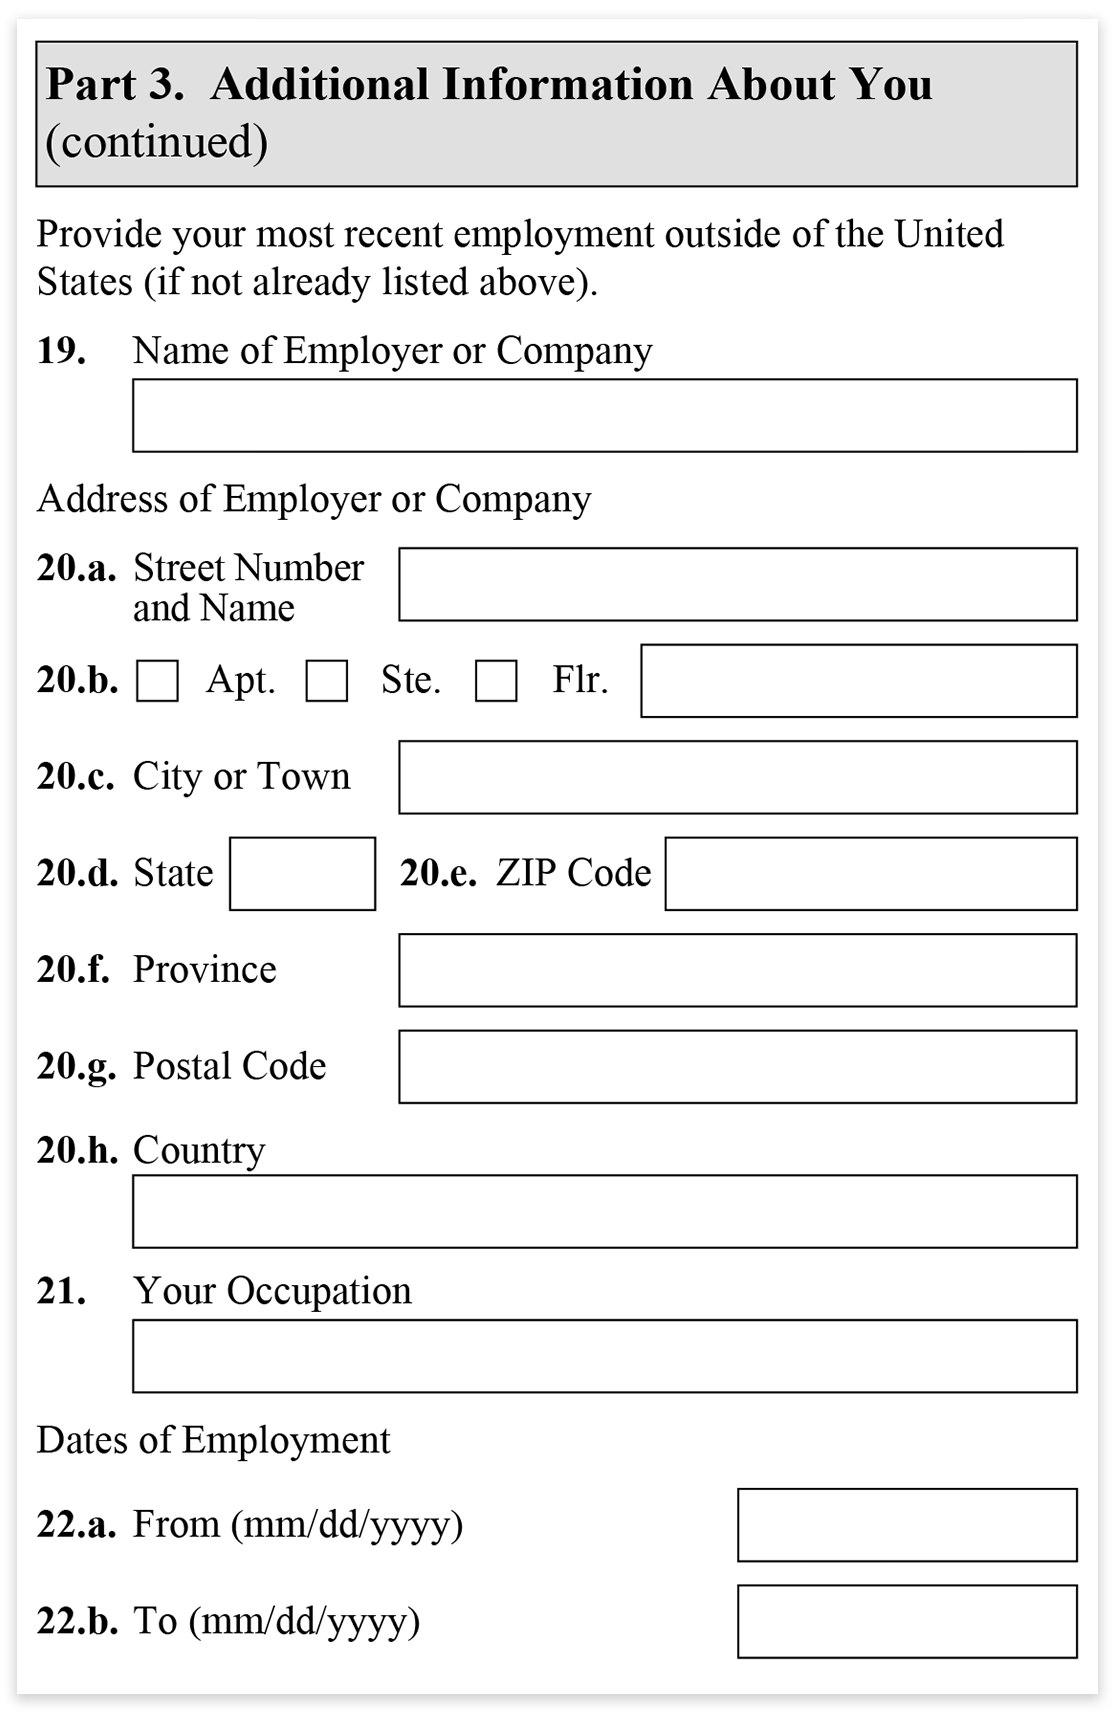 form-i-485-part-3-additional-information-continued-immigration